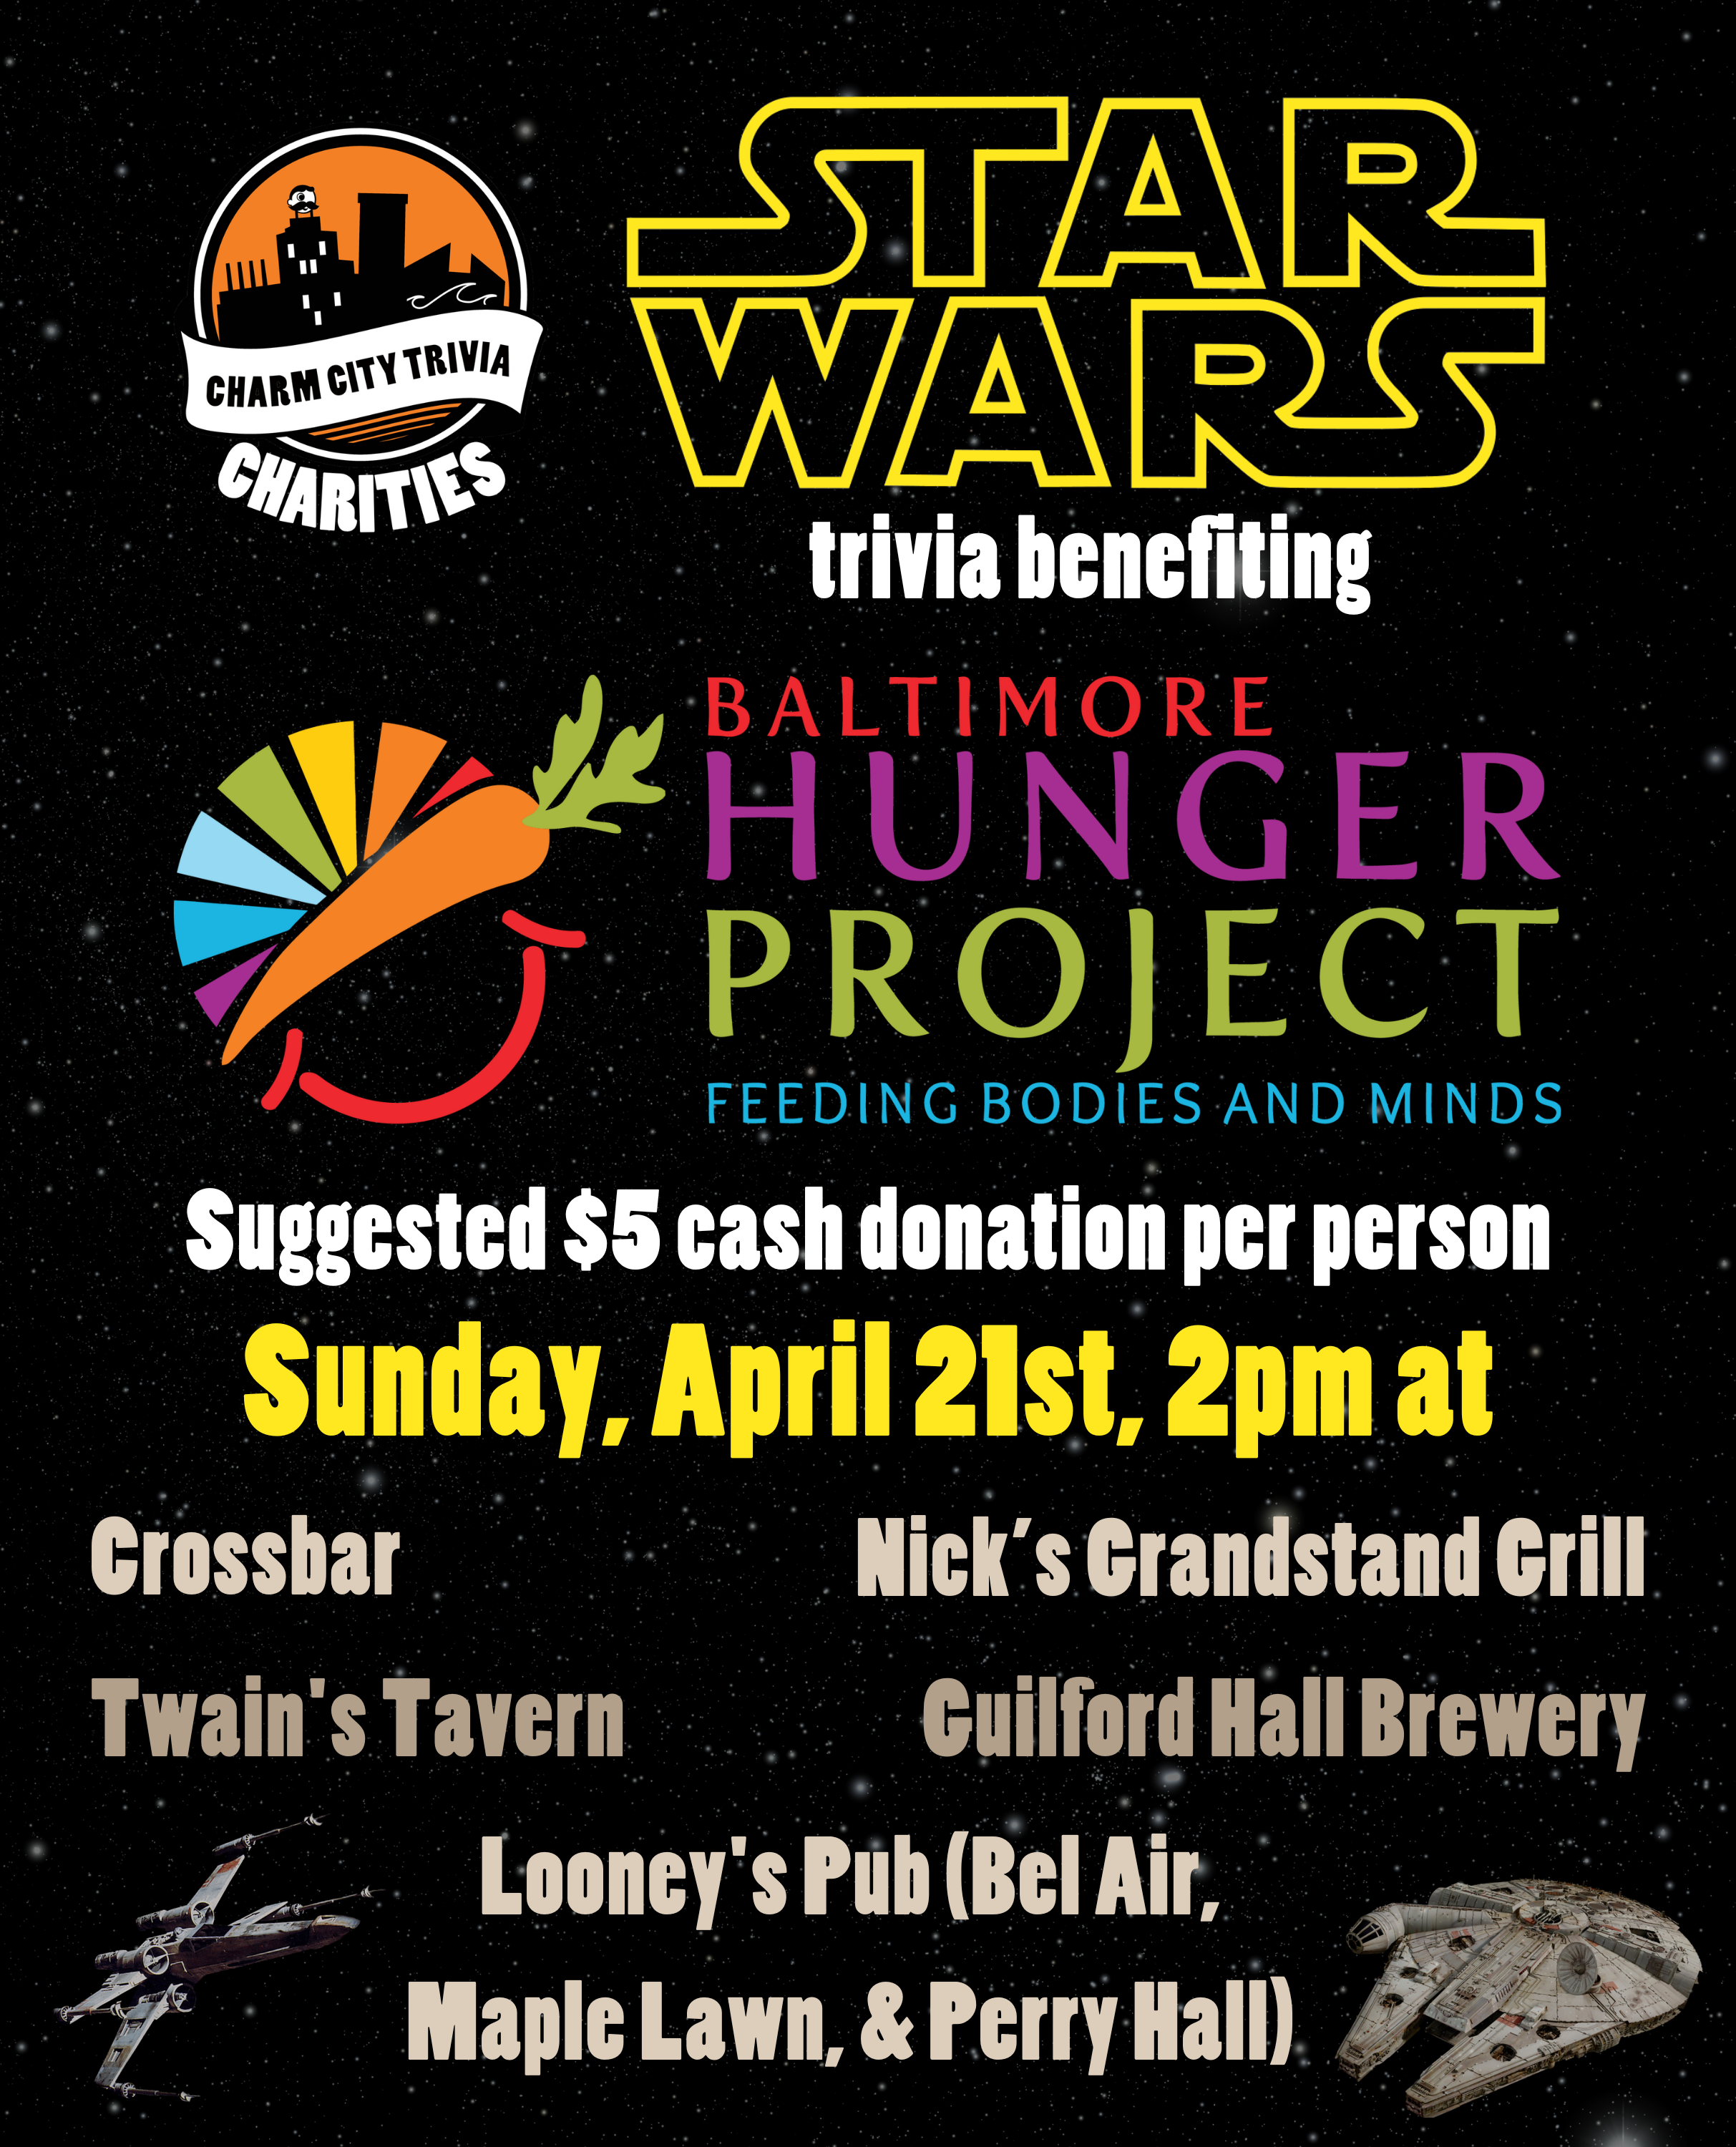 a starry space background with the Charm City Trivia Charities logo, the Baltimore Hunger Project logo, the Star Wars logo, the Millennium Falcon, an X-Wing, and yellow, medium warm gray, and white text. The text reads: Star Wars trivia benefiting Baltimore Hunger Project. Suggested $5 cash donation per person. Sunday, April 21st, 2pm at. Crossbar. Guilford Hall Brewery. Nick's Grandstand Grill. Twain's Tavern. Looney's Pub (Bel Air, Maple Lawn, & Perry Hall)